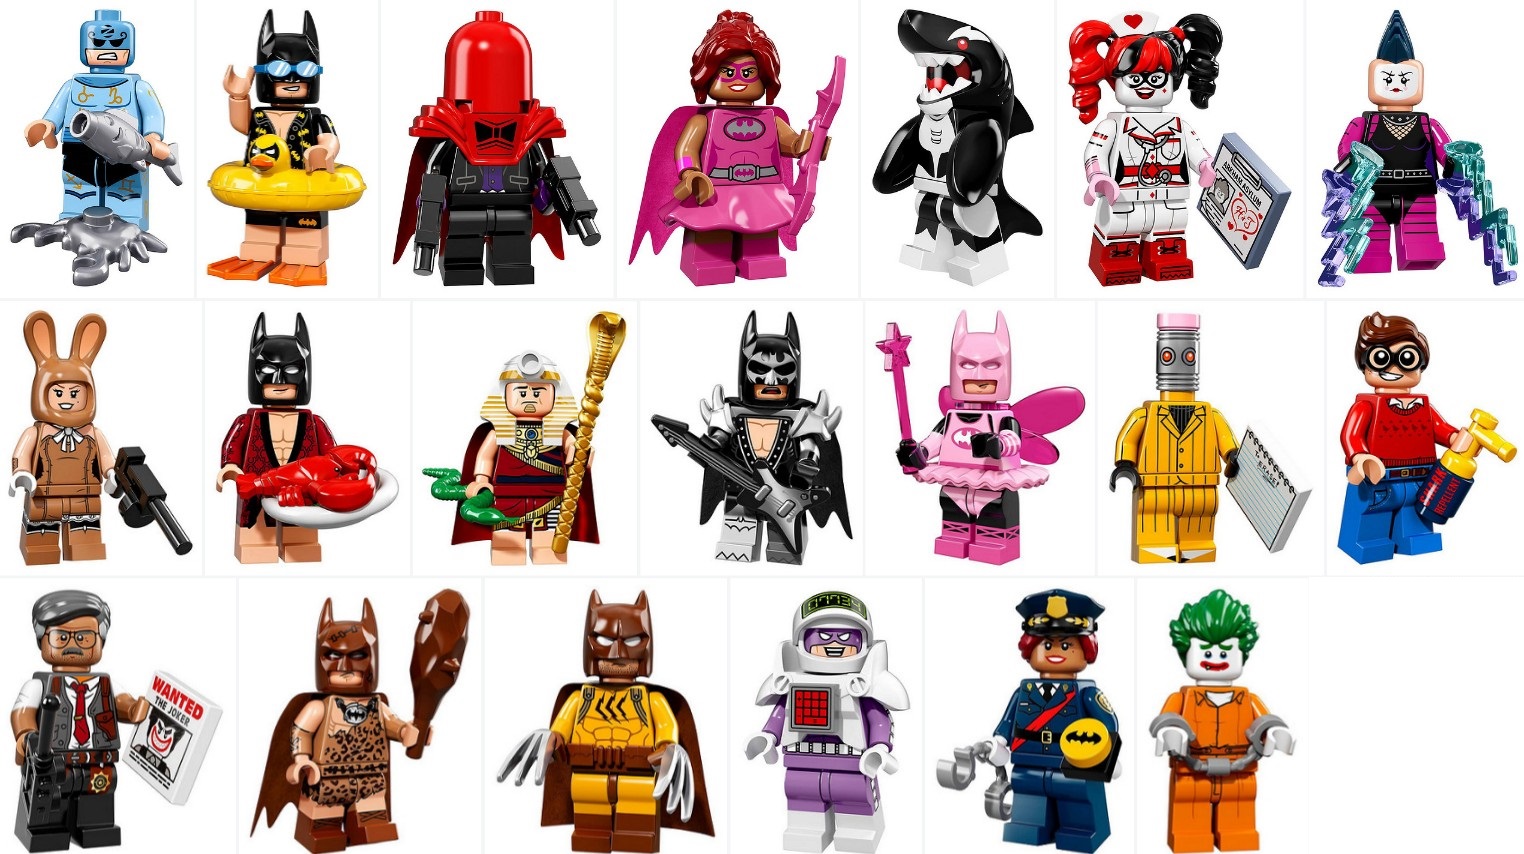 Lego 71017 Collectible Batman Movie Minifigures Officially Revealed -  Minifigure Price Guide